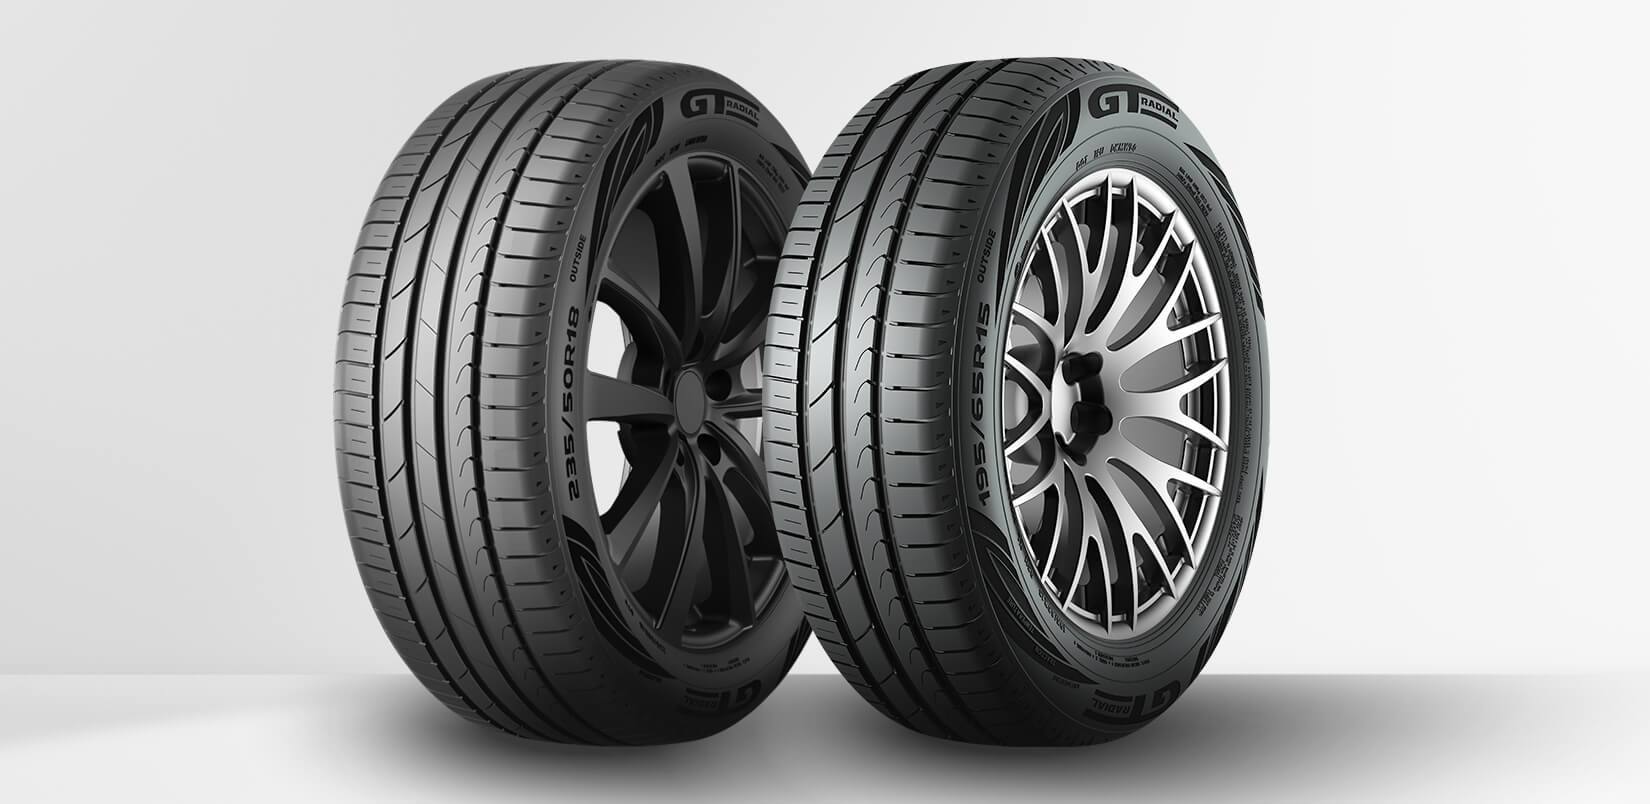 to GT New mass performance original\'s accelerate GT RADIAL Radial high success tyre | market FE2